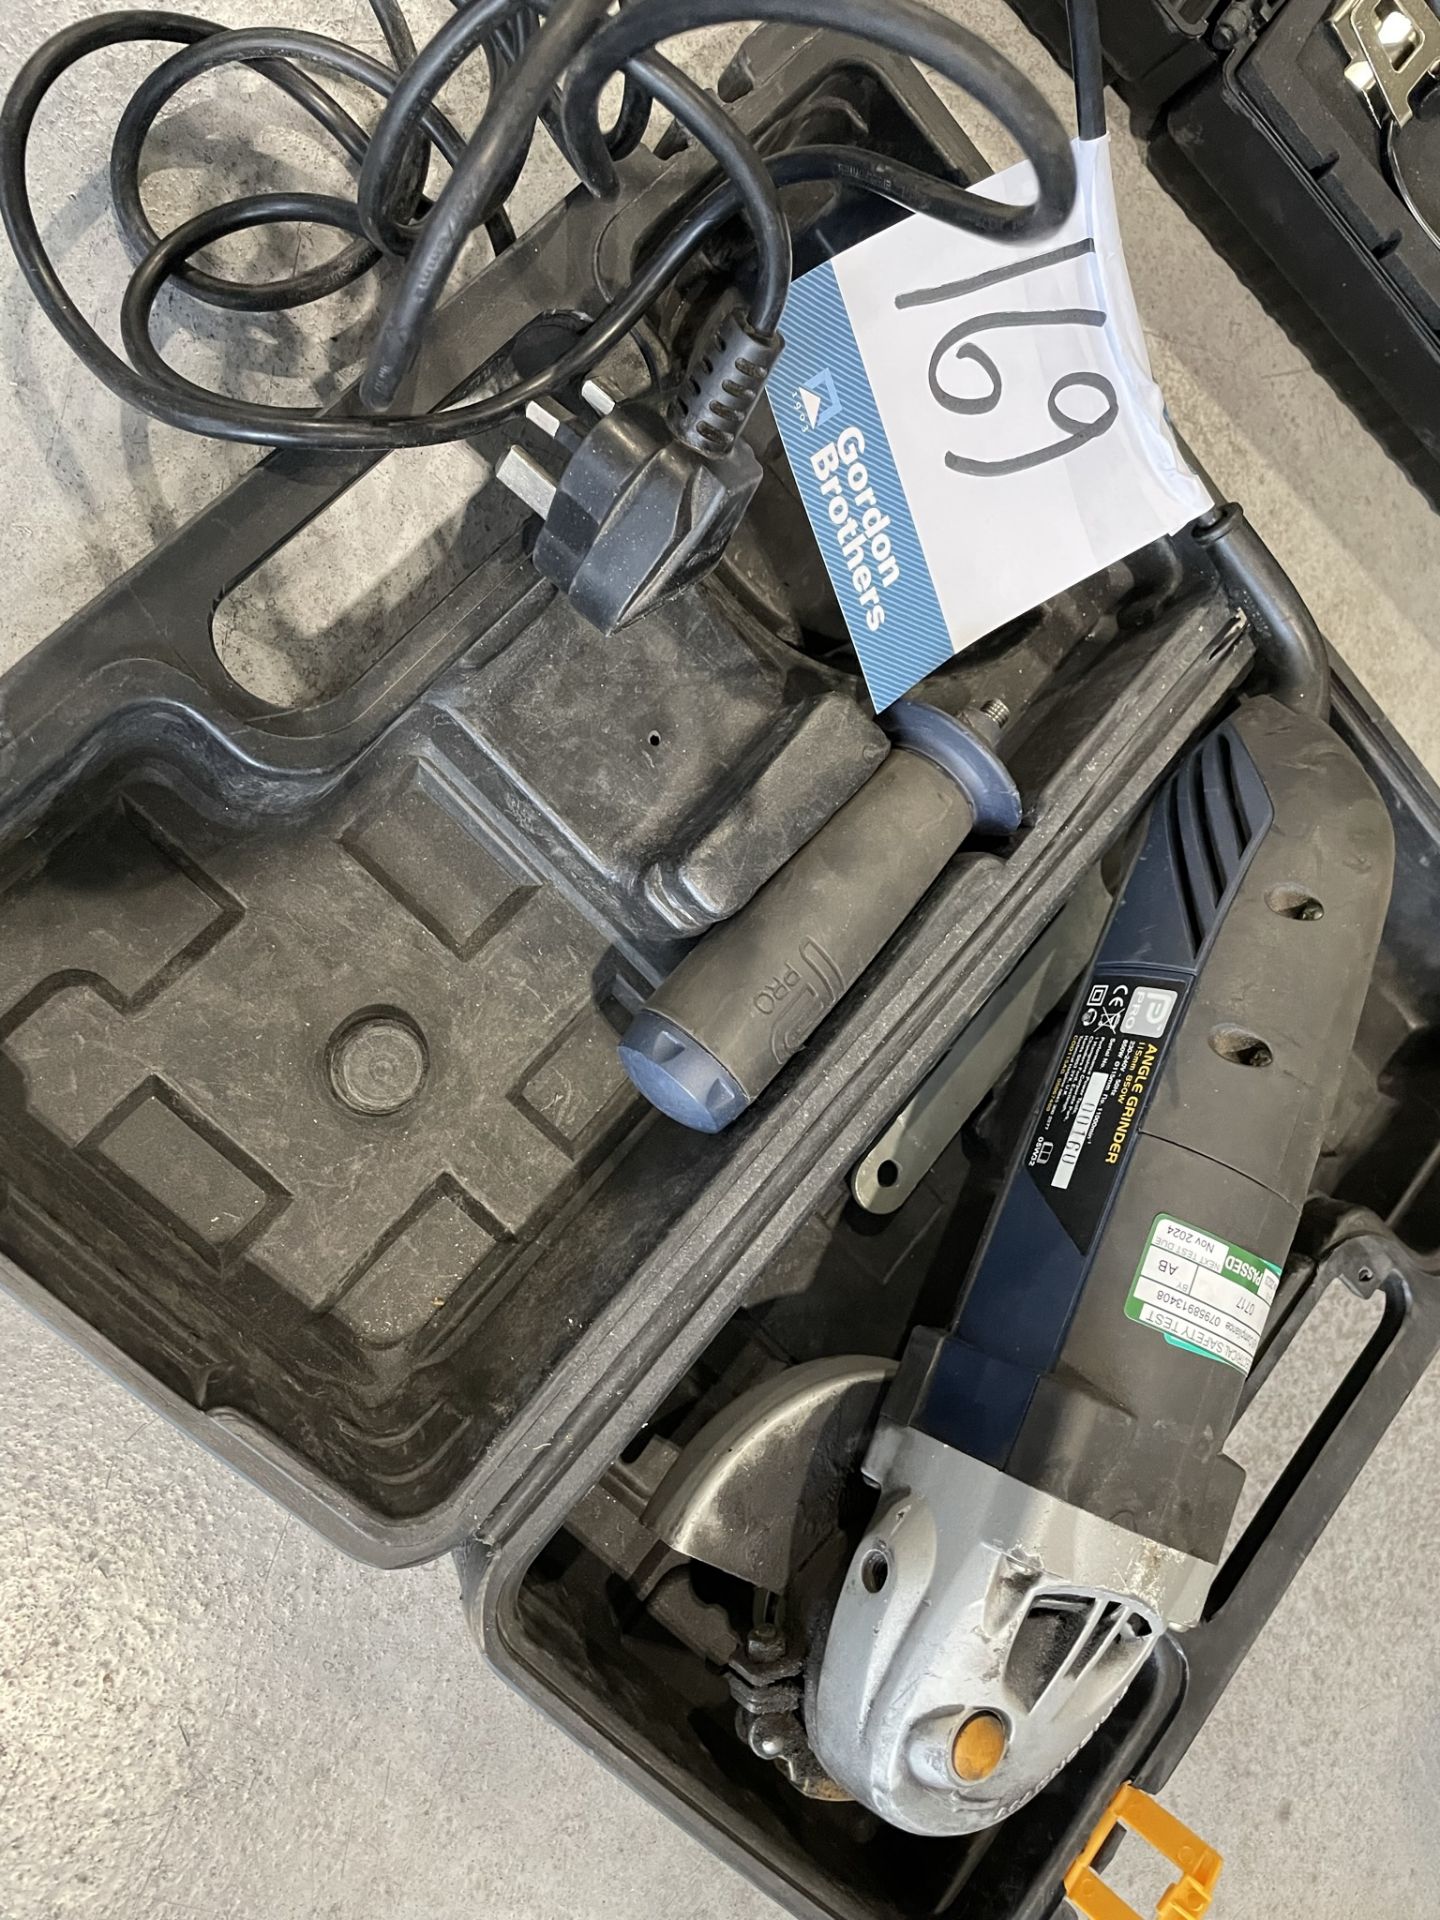 Pro, 115mm angle grinder and carry case